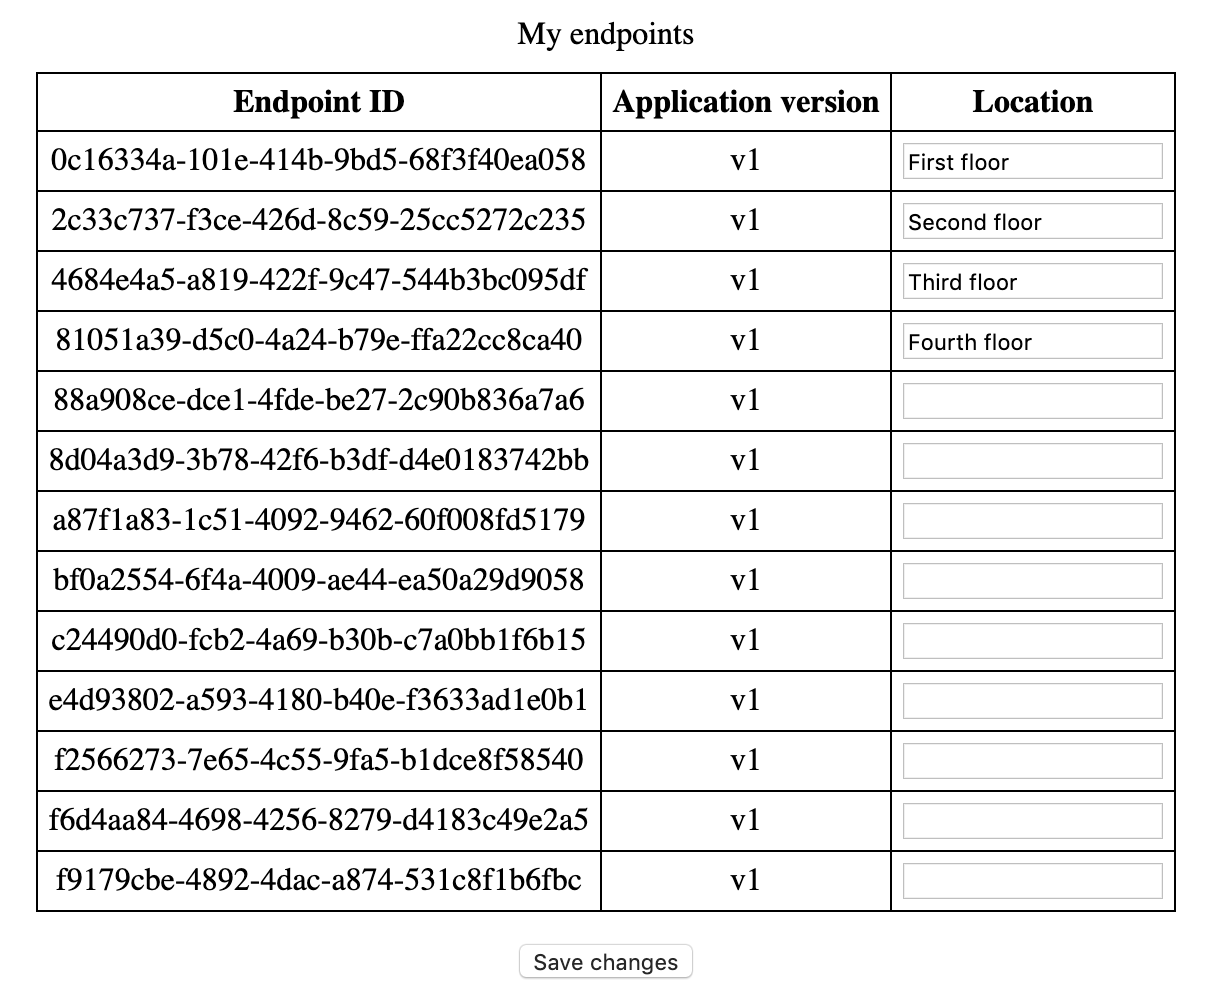 Endpoint table with location